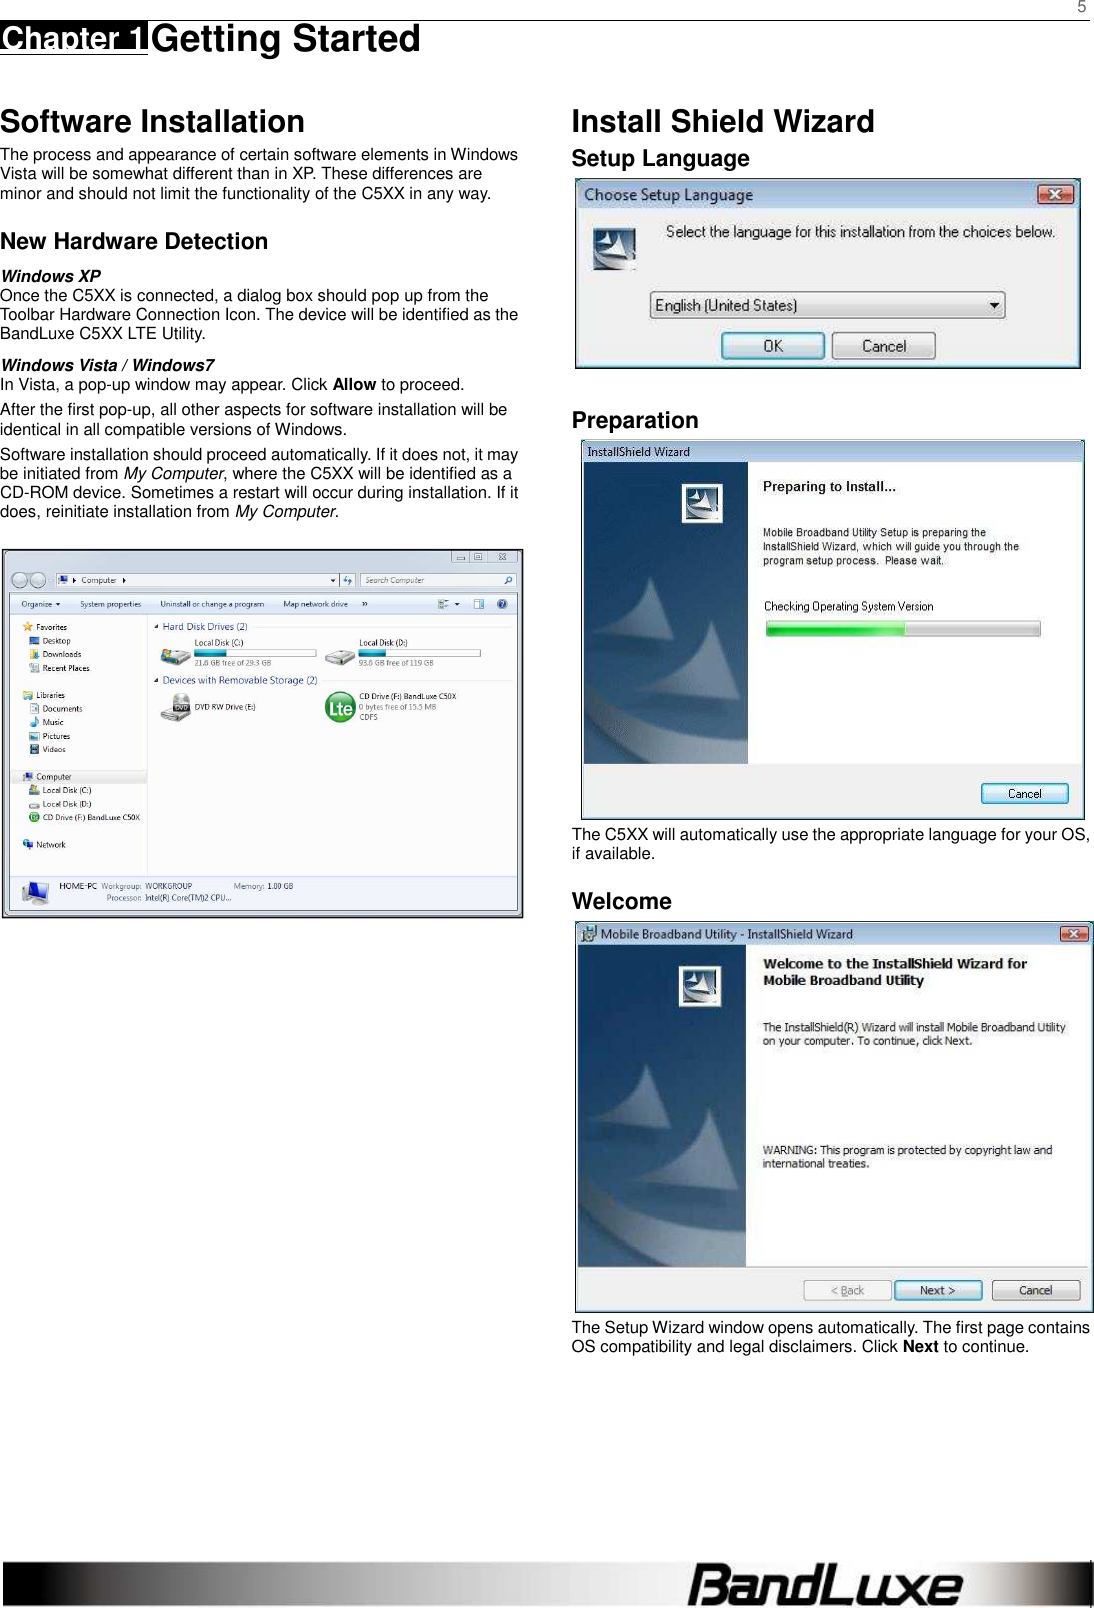     5 Chapter 1 Getting Started      Software Installation The process and appearance of certain software elements in Windows Vista will be somewhat different than in XP. These differences are minor and should not limit the functionality of the C5XX in any way. New Hardware Detection Windows XP Once the C5XX is connected, a dialog box should pop up from the Toolbar Hardware Connection Icon. The device will be identified as the BandLuxe C5XX LTE Utility.   Windows Vista / Windows7 In Vista, a pop-up window may appear. Click Allow to proceed. After the first pop-up, all other aspects for software installation will be identical in all compatible versions of Windows. Software installation should proceed automatically. If it does not, it may be initiated from My Computer, where the C5XX will be identified as a CD-ROM device. Sometimes a restart will occur during installation. If it does, reinitiate installation from My Computer.                         Install Shield Wizard Setup Language   Preparation  The C5XX will automatically use the appropriate language for your OS, if available. Welcome  The Setup Wizard window opens automatically. The first page contains OS compatibility and legal disclaimers. Click Next to continue.     